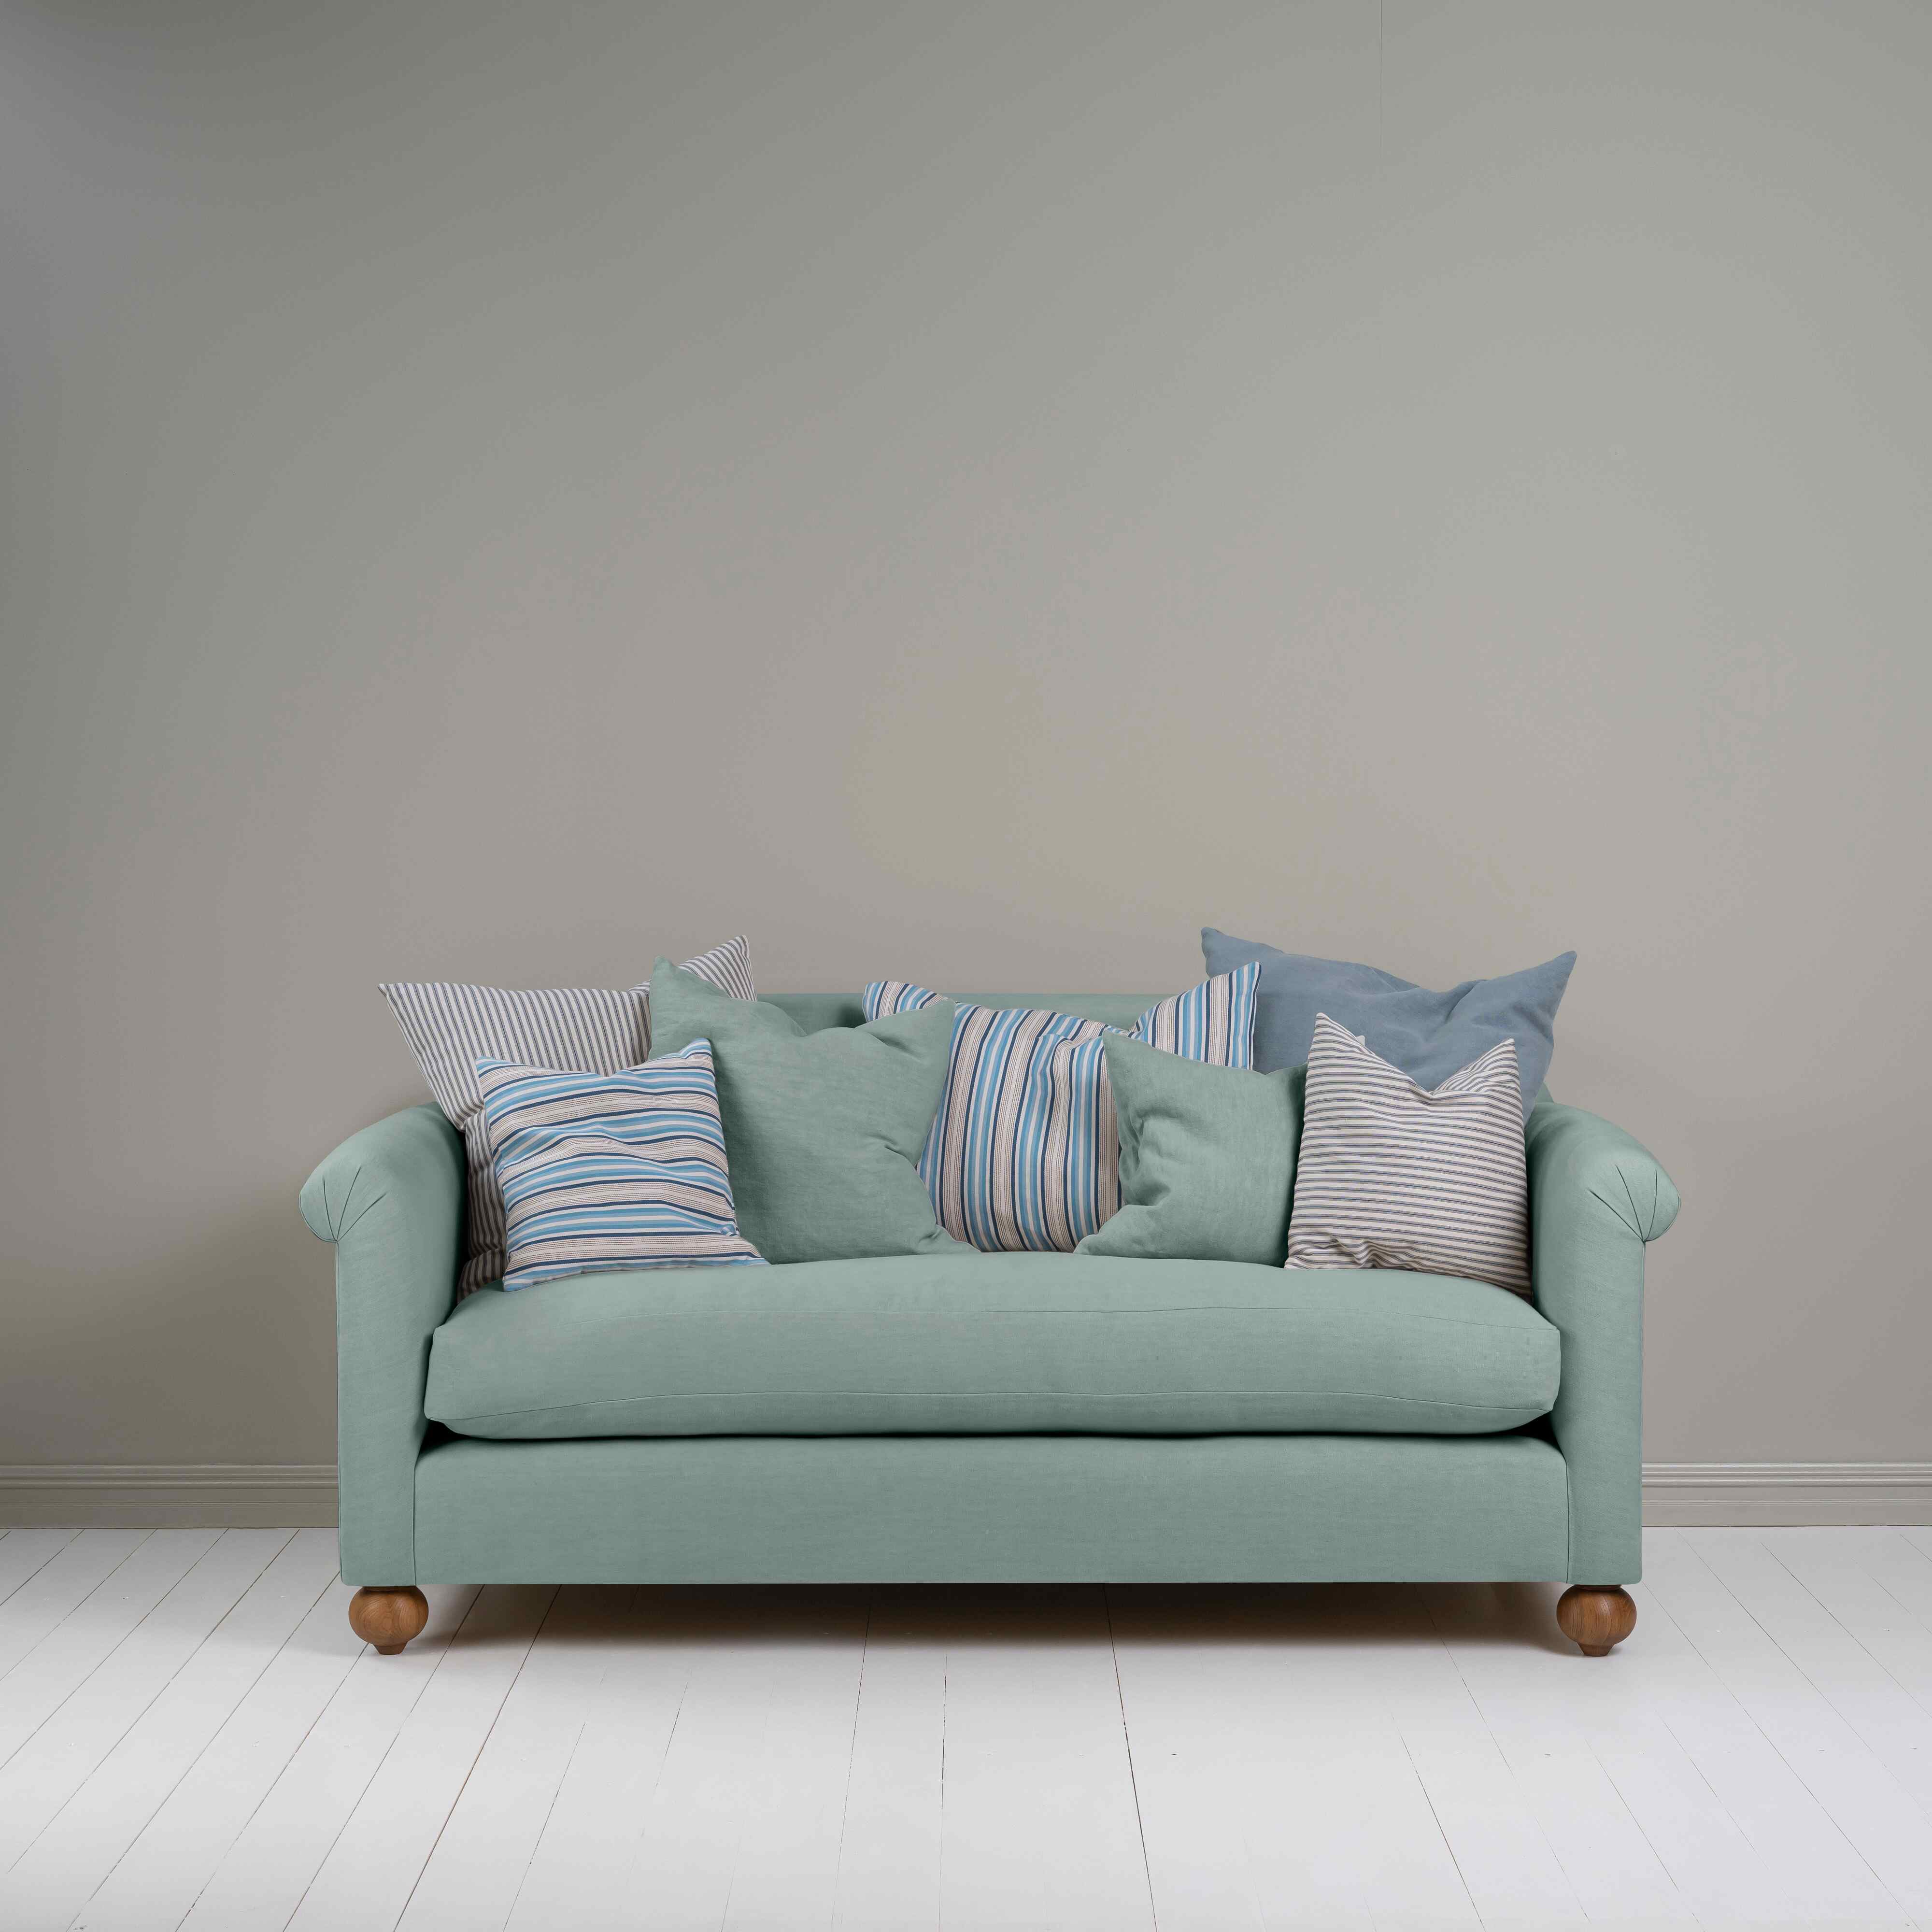  Dolittle 3 Seater Sofa in Laidback Linen Mineral 